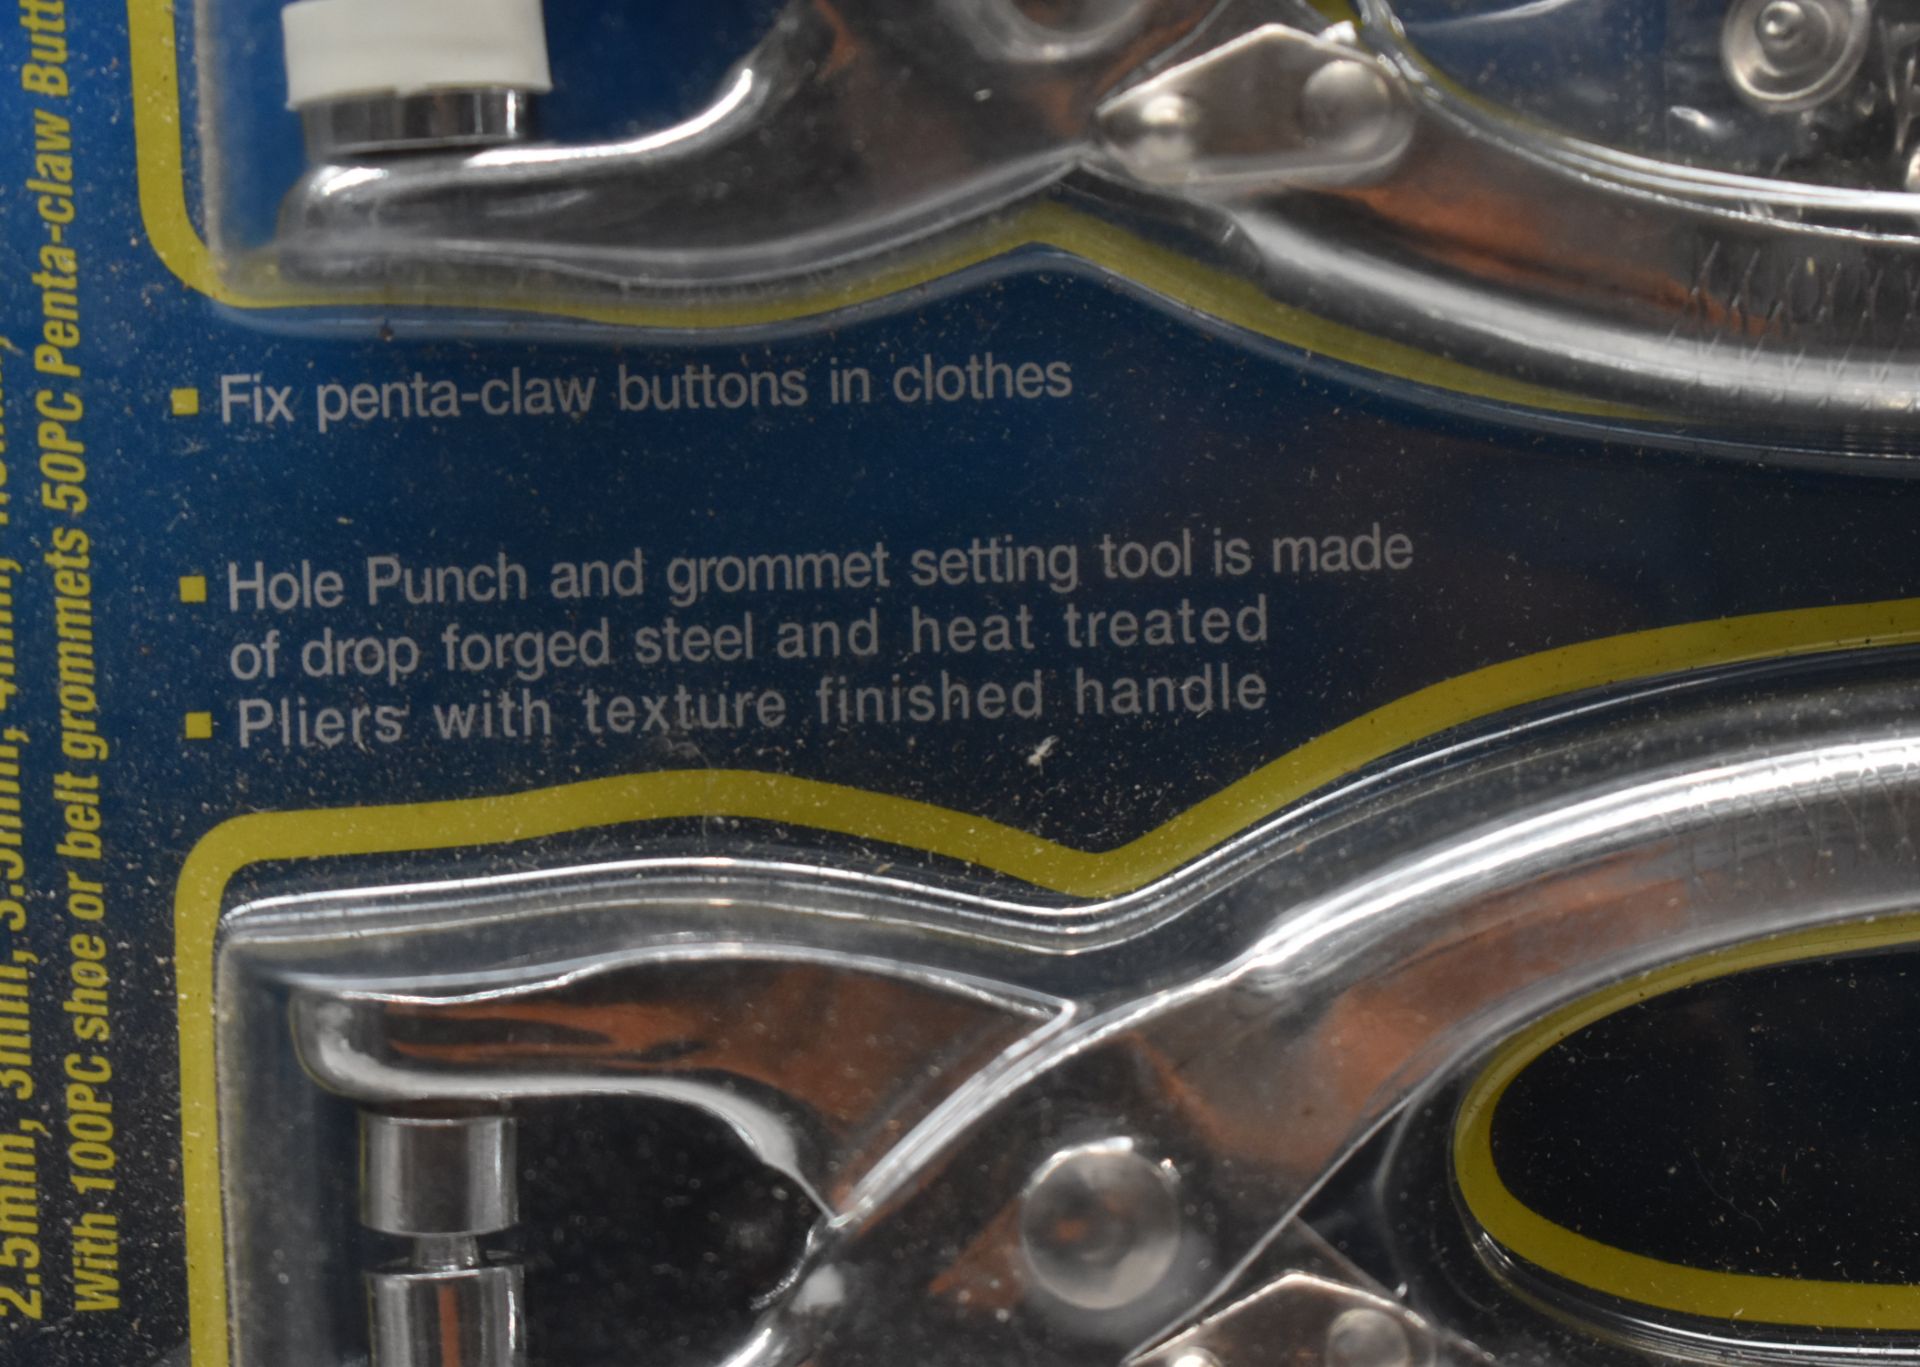 1 x MAPLIN Leather Hole Punch & Grommet Setting Tool Kit - Ref: K250 - CL905 - Location: Altrincham - Image 3 of 7